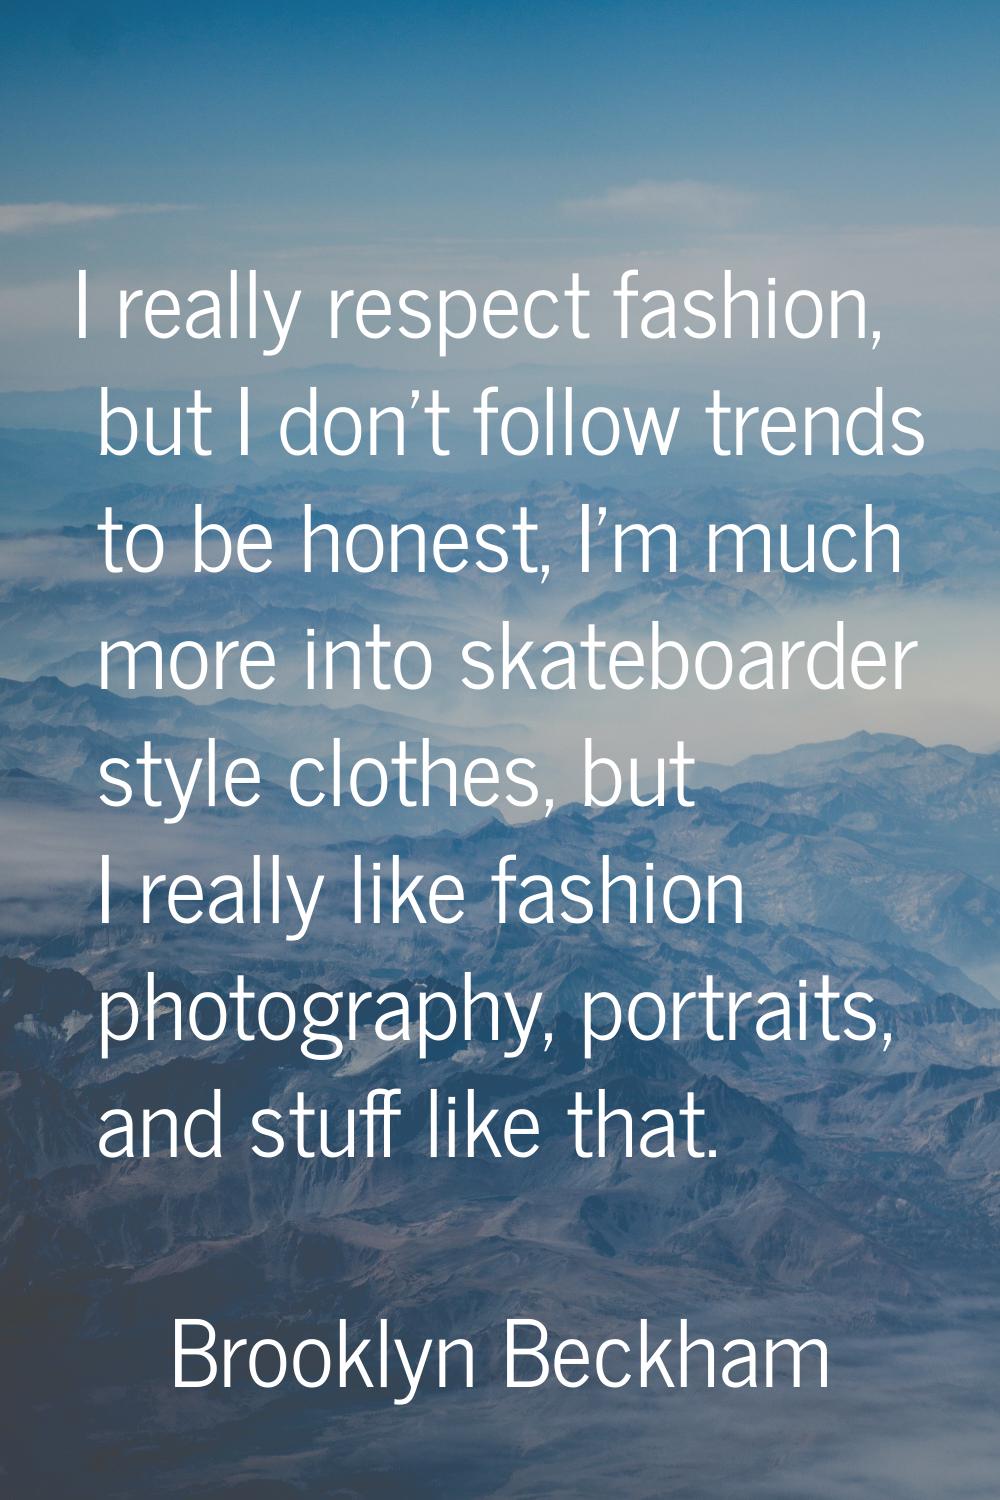 I really respect fashion, but I don't follow trends to be honest, I'm much more into skateboarder s